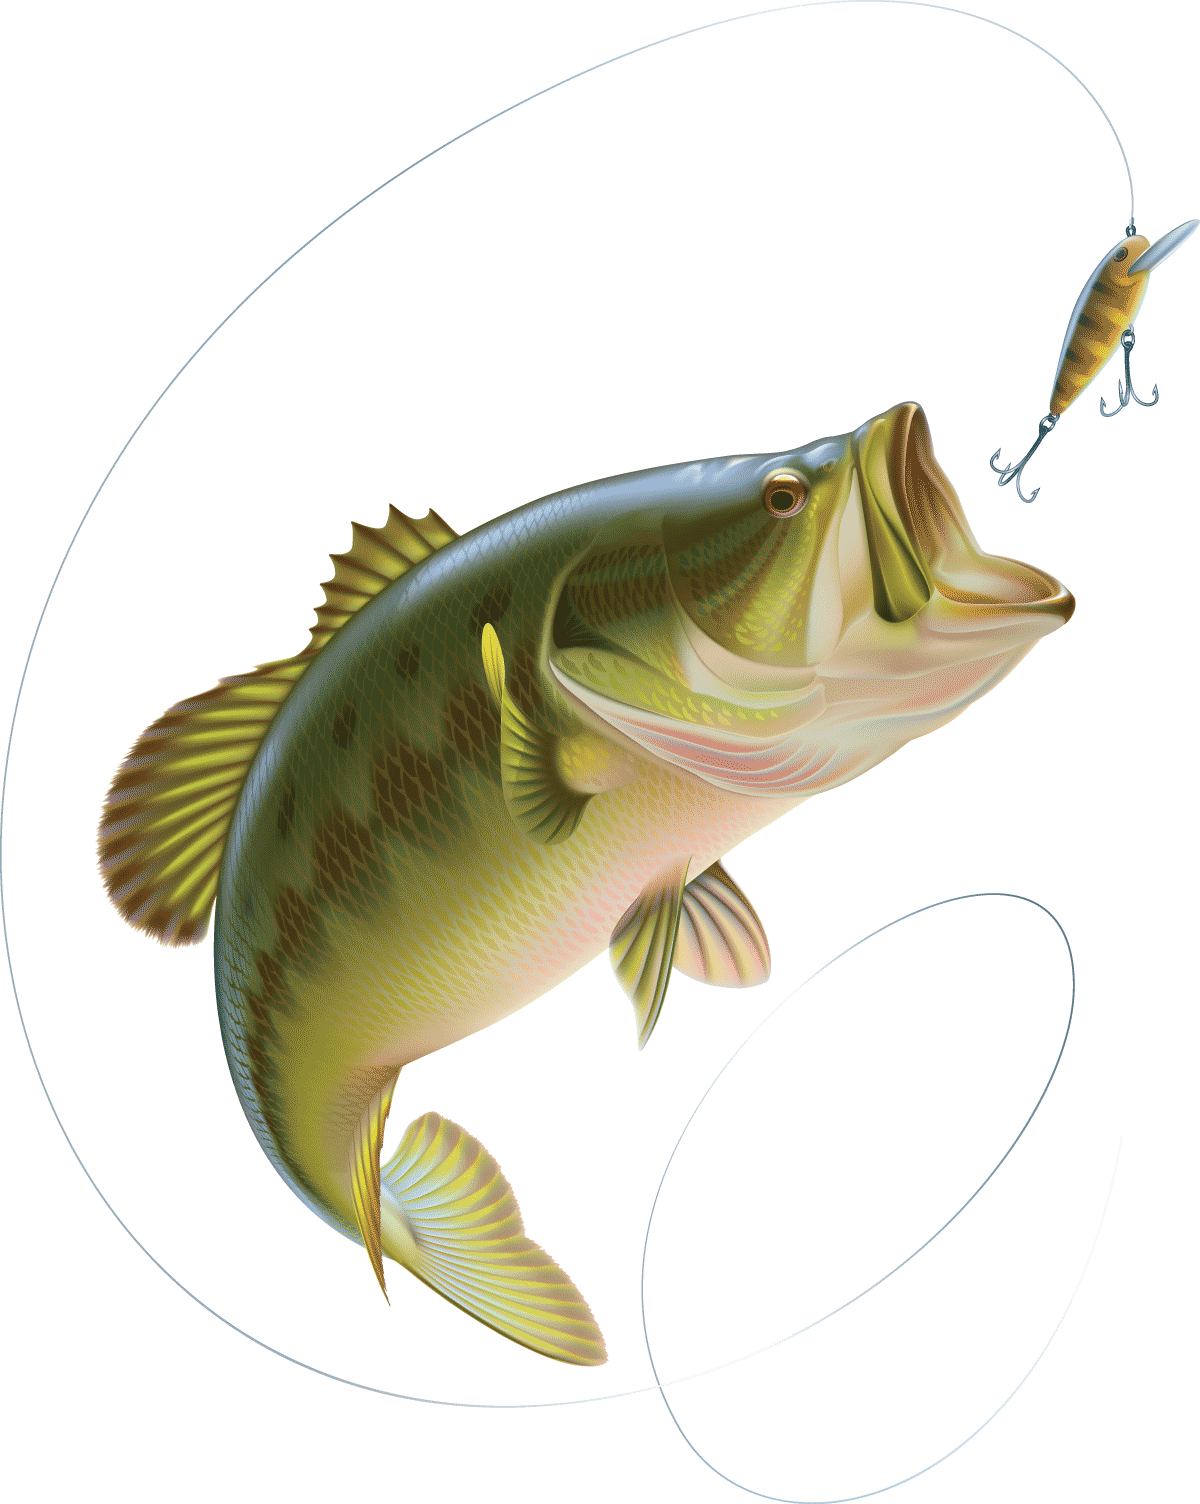  The summer can be slow for bass fishermen. The water is warm and the oxygen that fish need for peak activity is not found in warmer water. Therefore they tend to go deeper or become more active when the days are at their coolest.